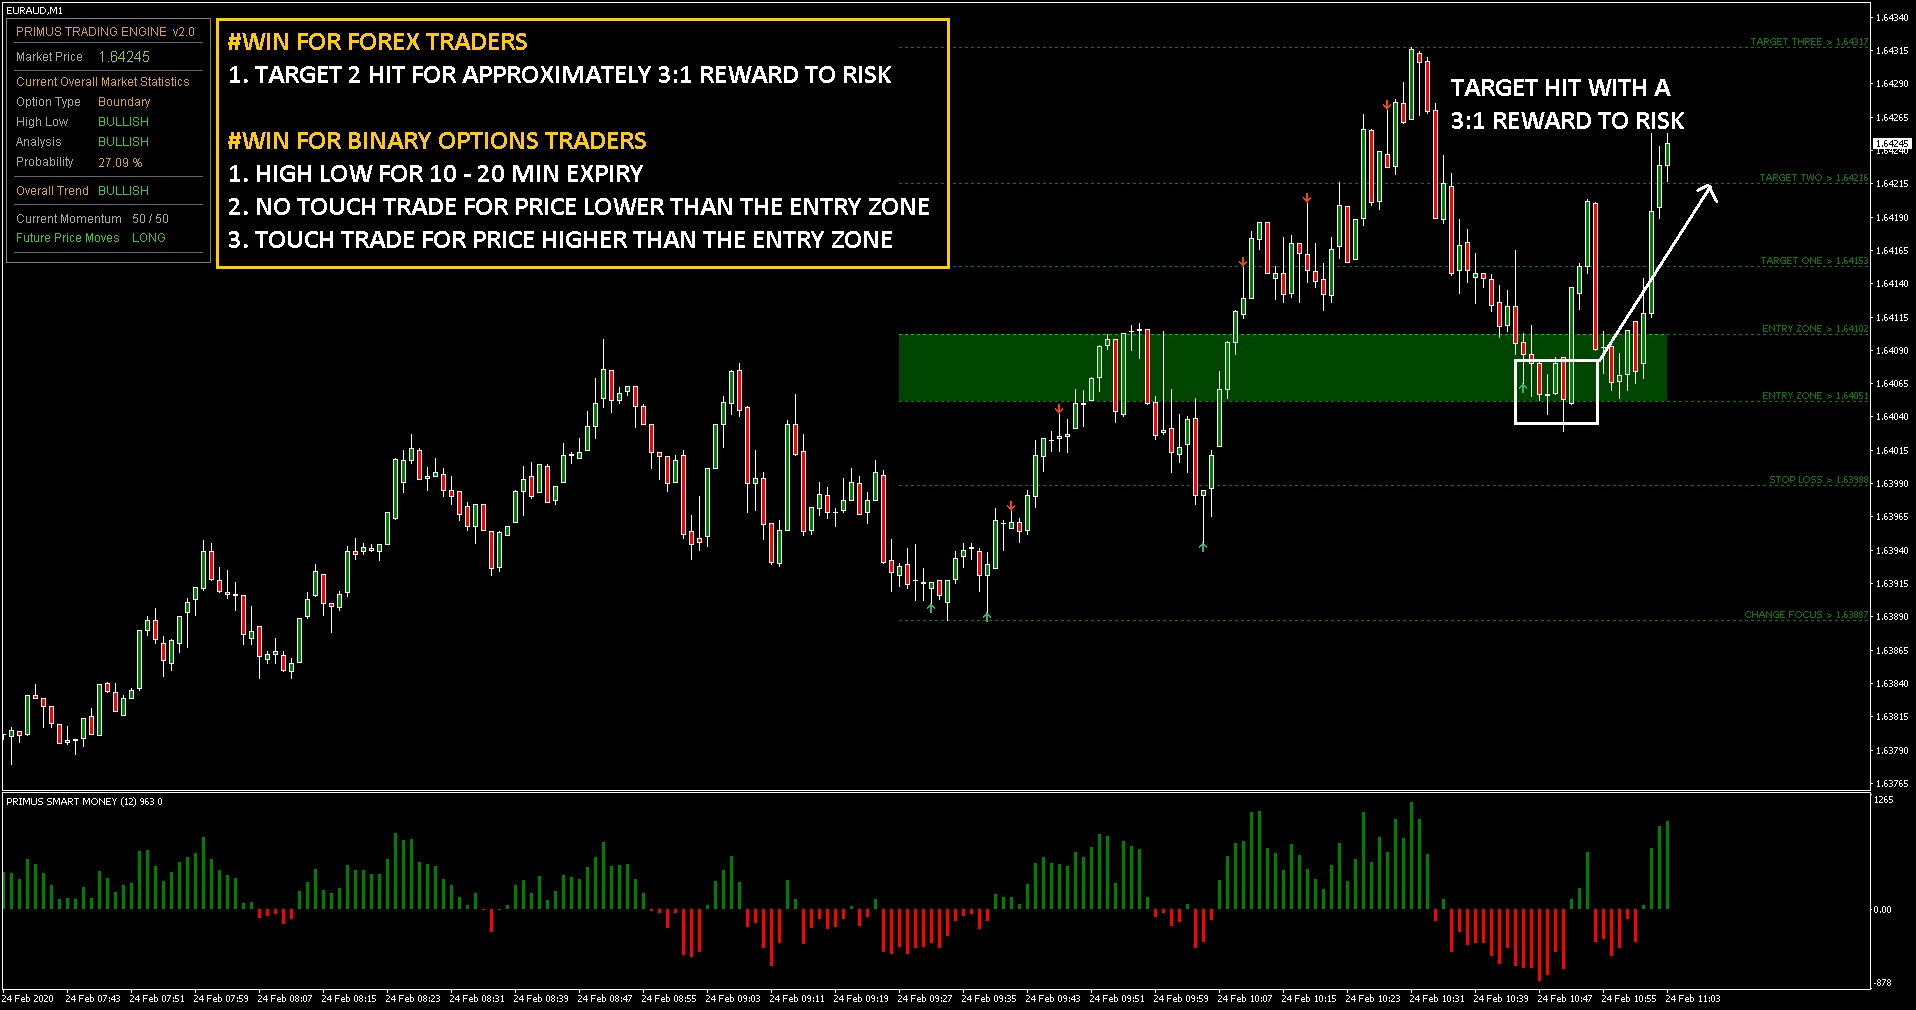 Mql5 Trading Signals Review